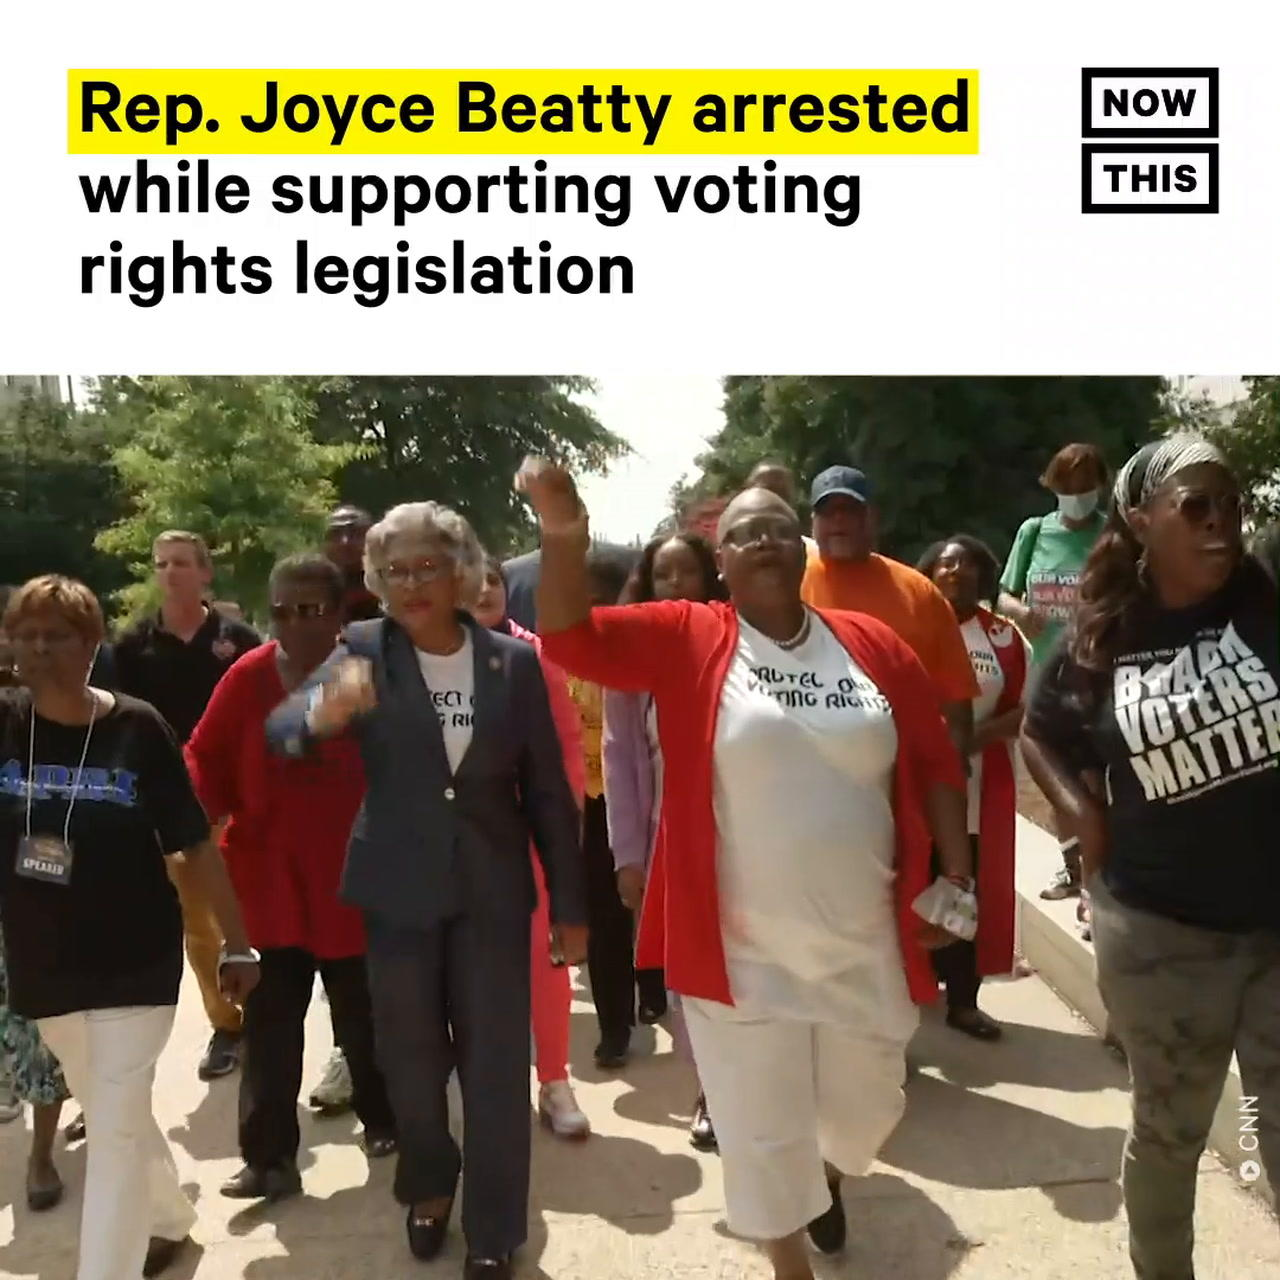 Rep. Joyce Beatty Arrested While Supporting Voting Rights Legislation